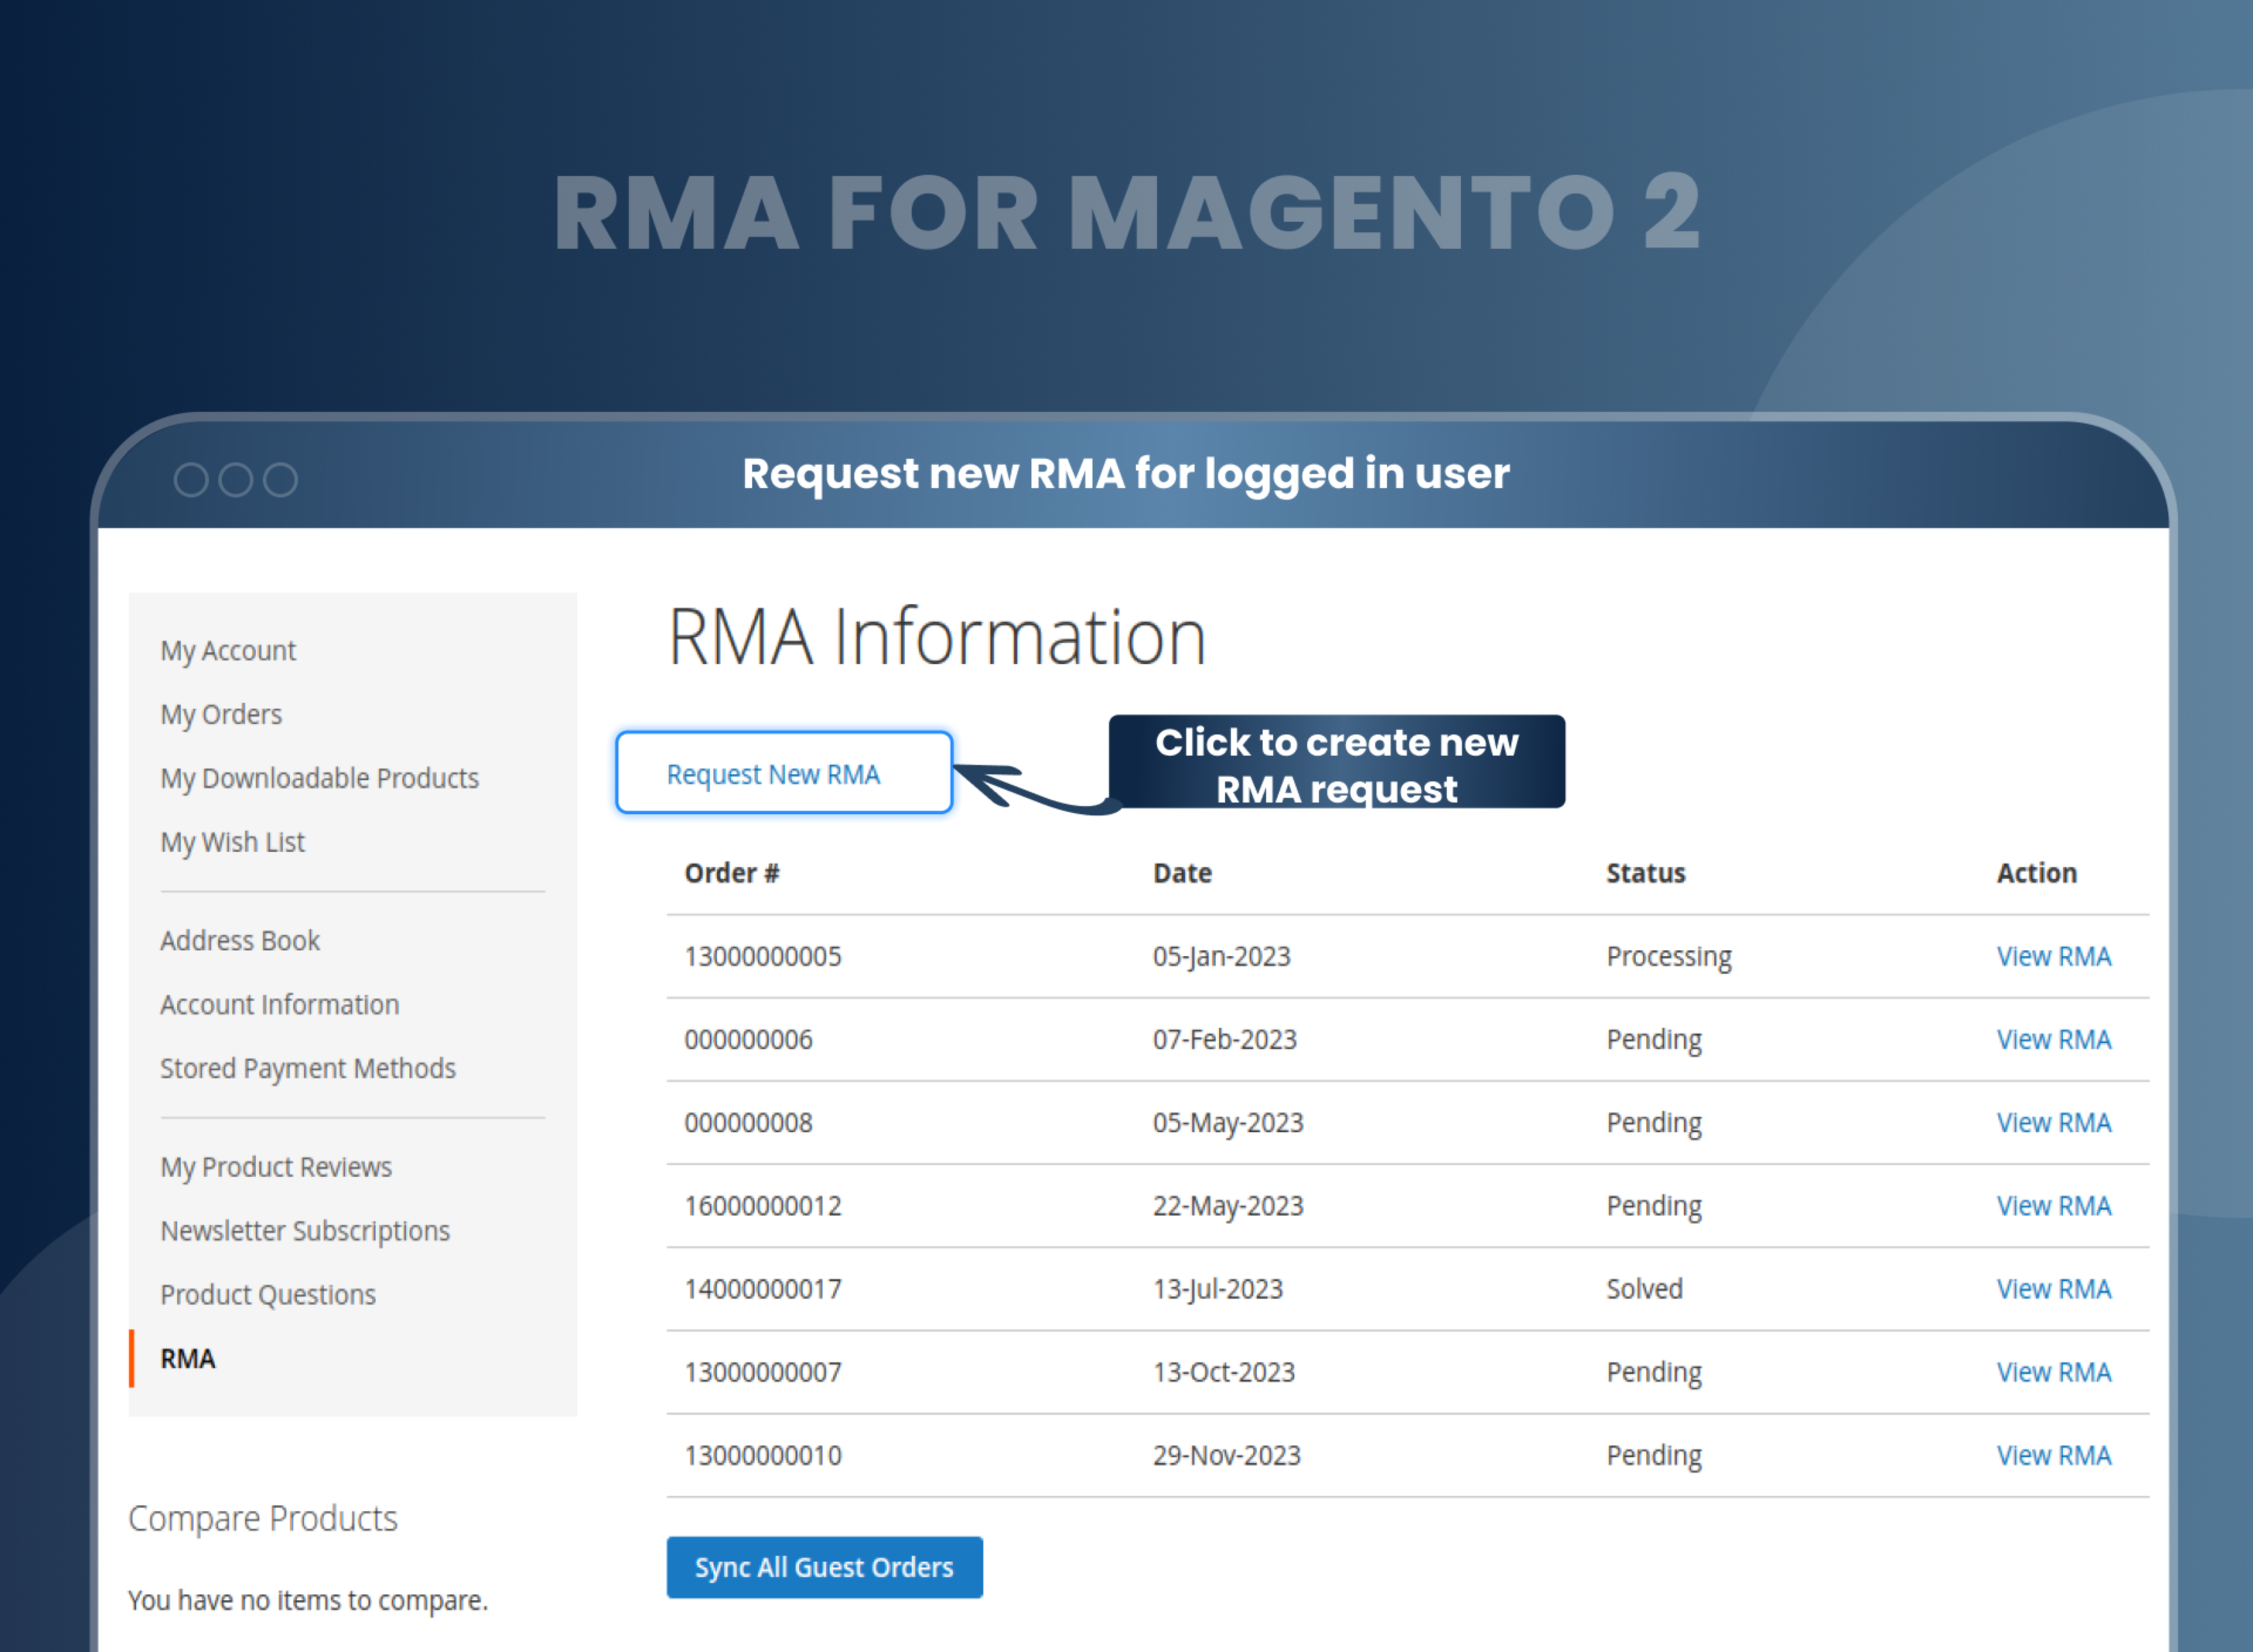 Request new RMA for logged in user